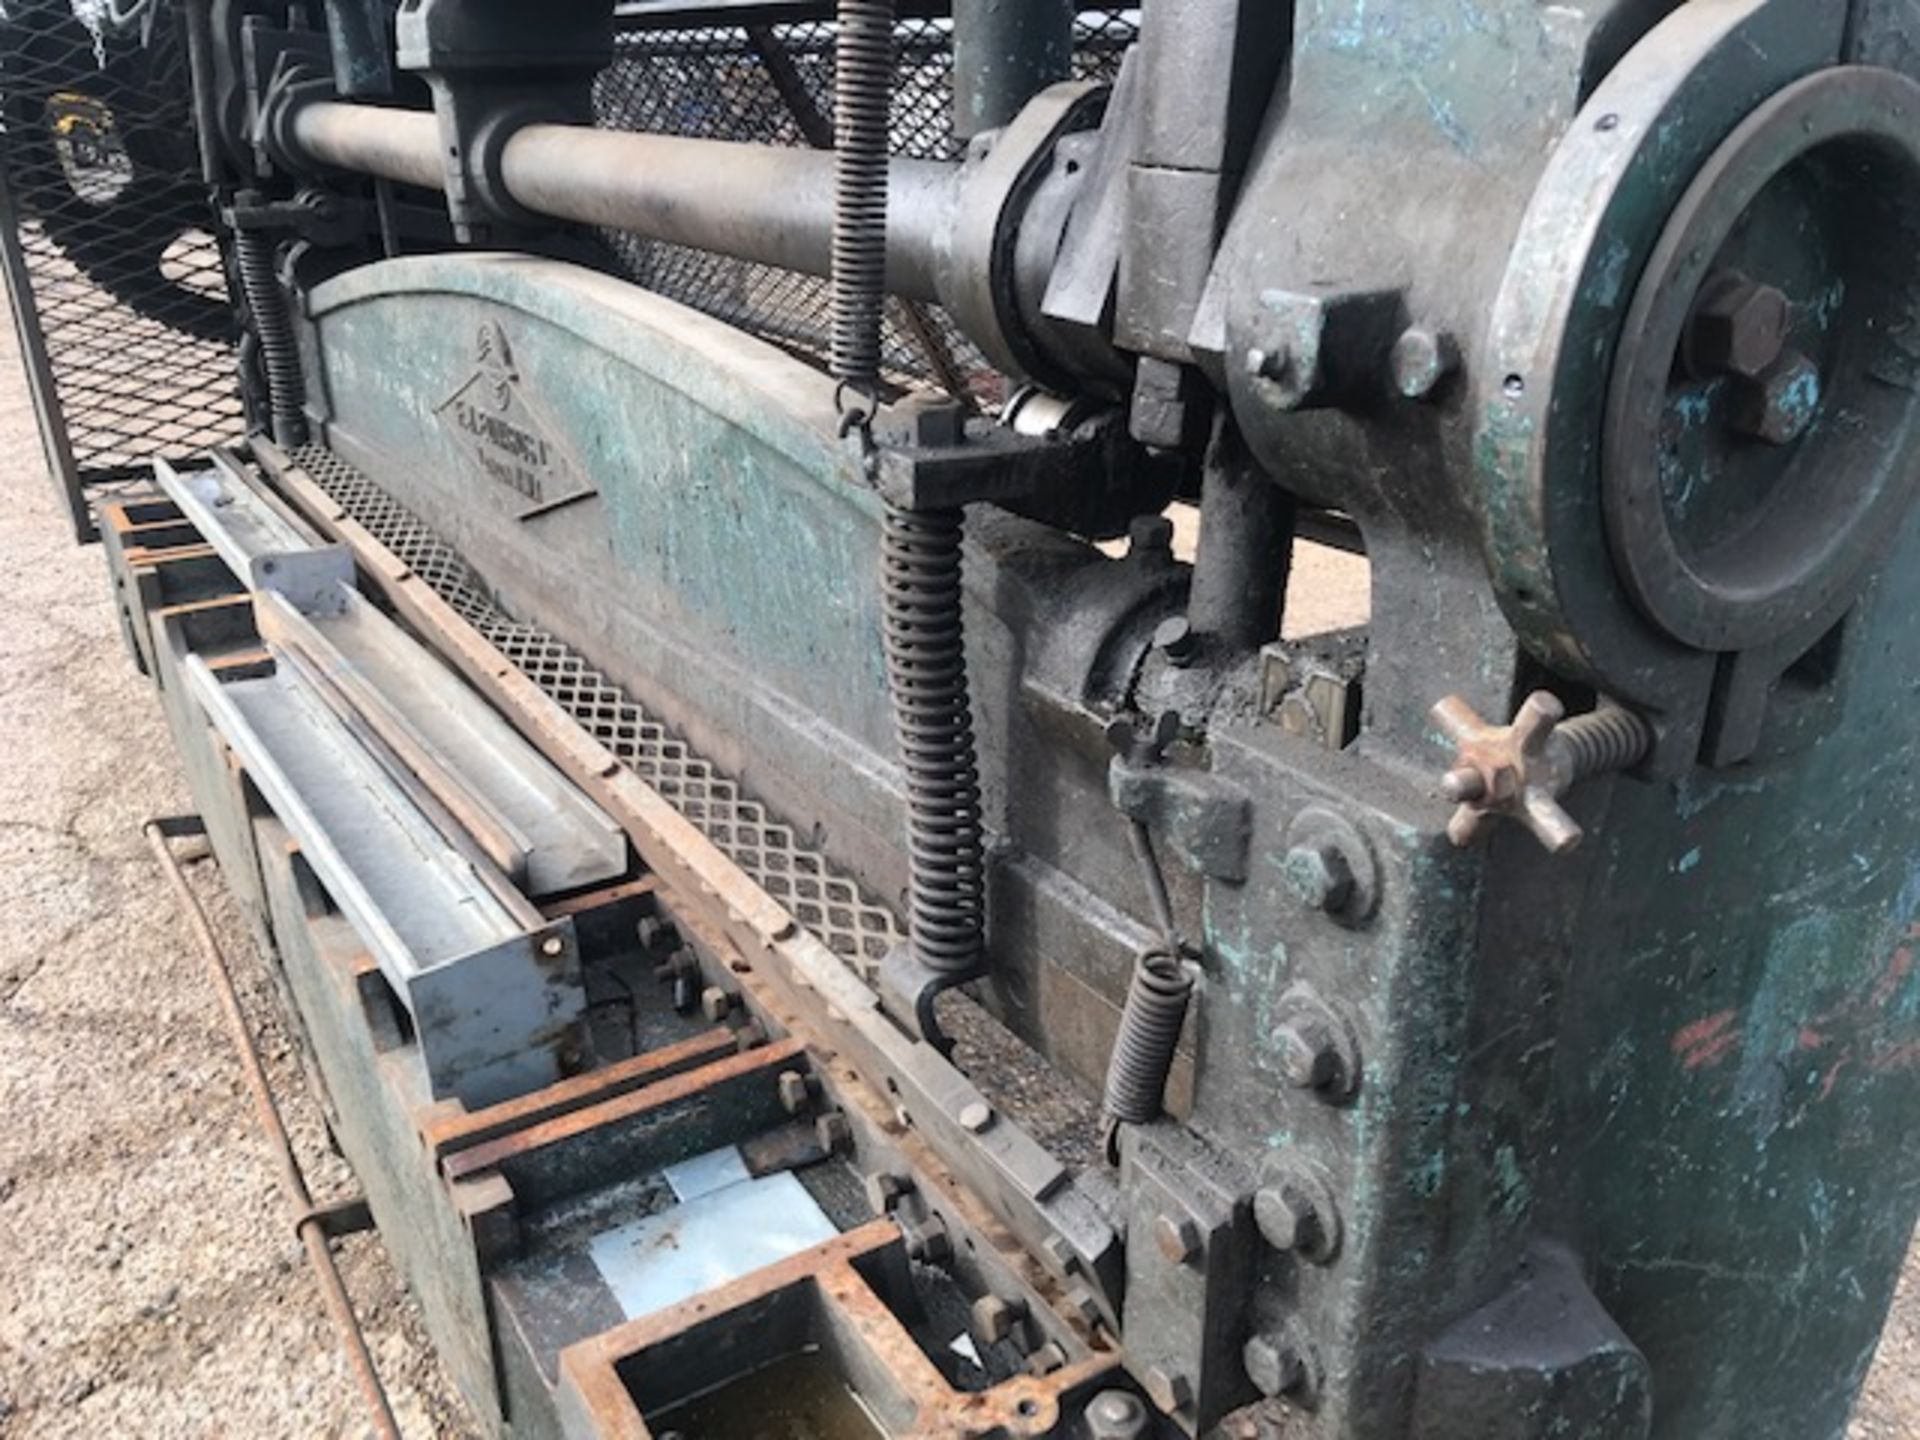 EDWARDS 3 PHASE GUILLOTENE, 8FT BLADE, WORKING WHEN RECENTLY REMOVED. - Image 10 of 11